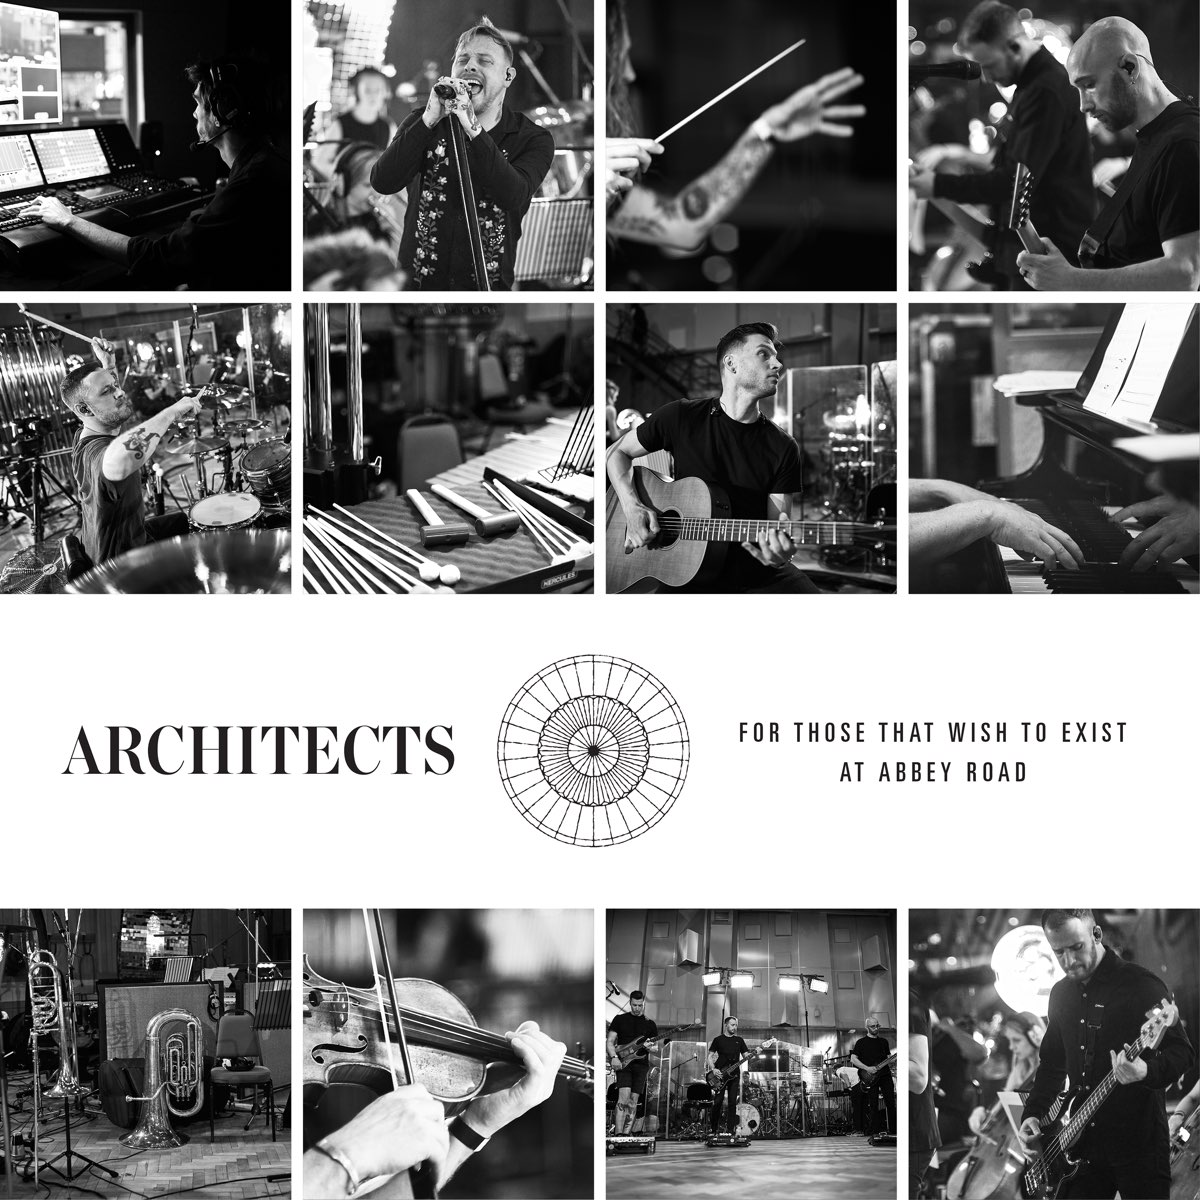 ‎For Those That Wish to Exist at Abbey Road by Architects